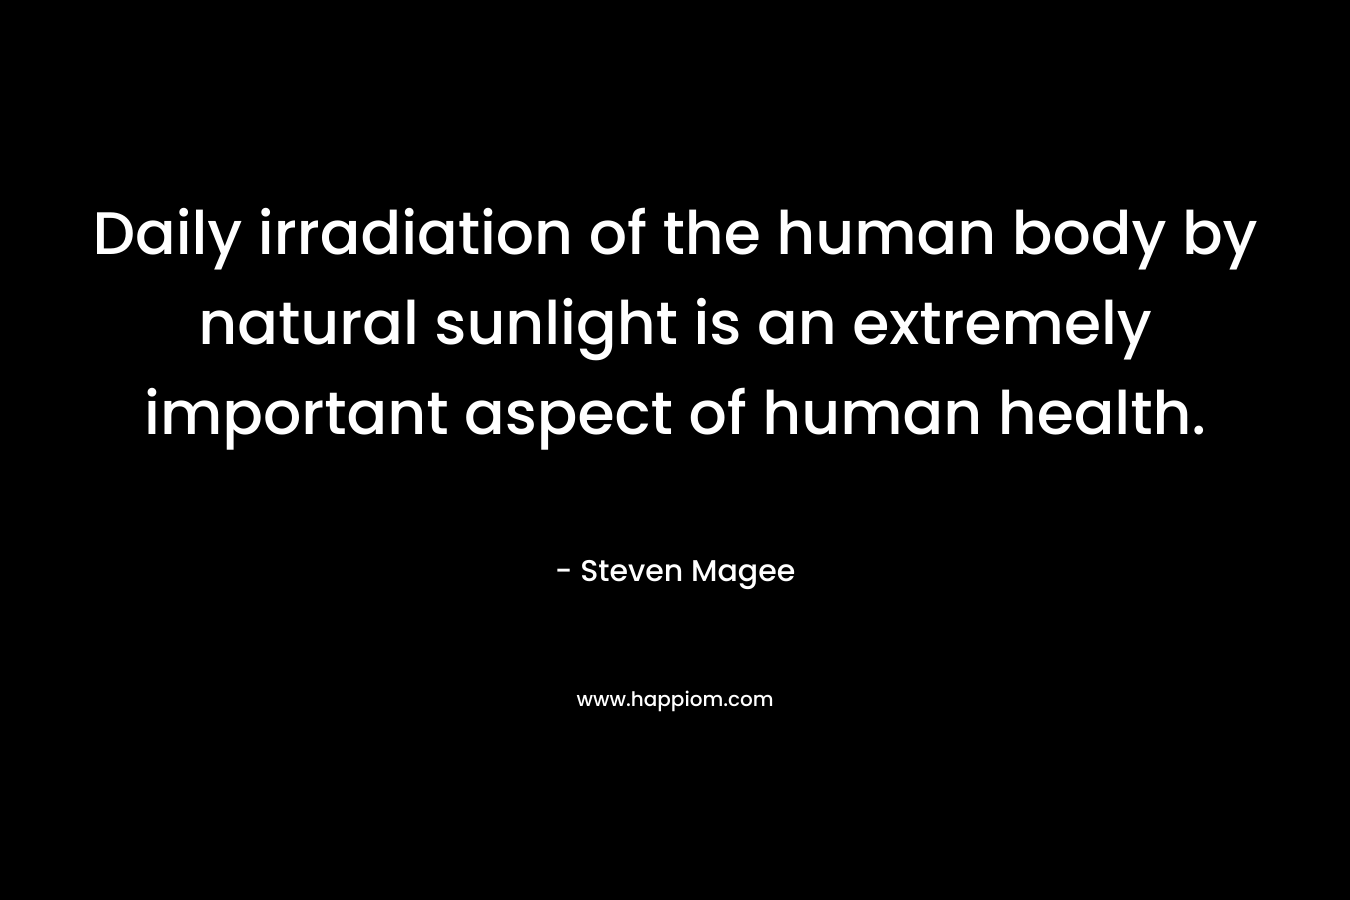 Daily irradiation of the human body by natural sunlight is an extremely important aspect of human health.